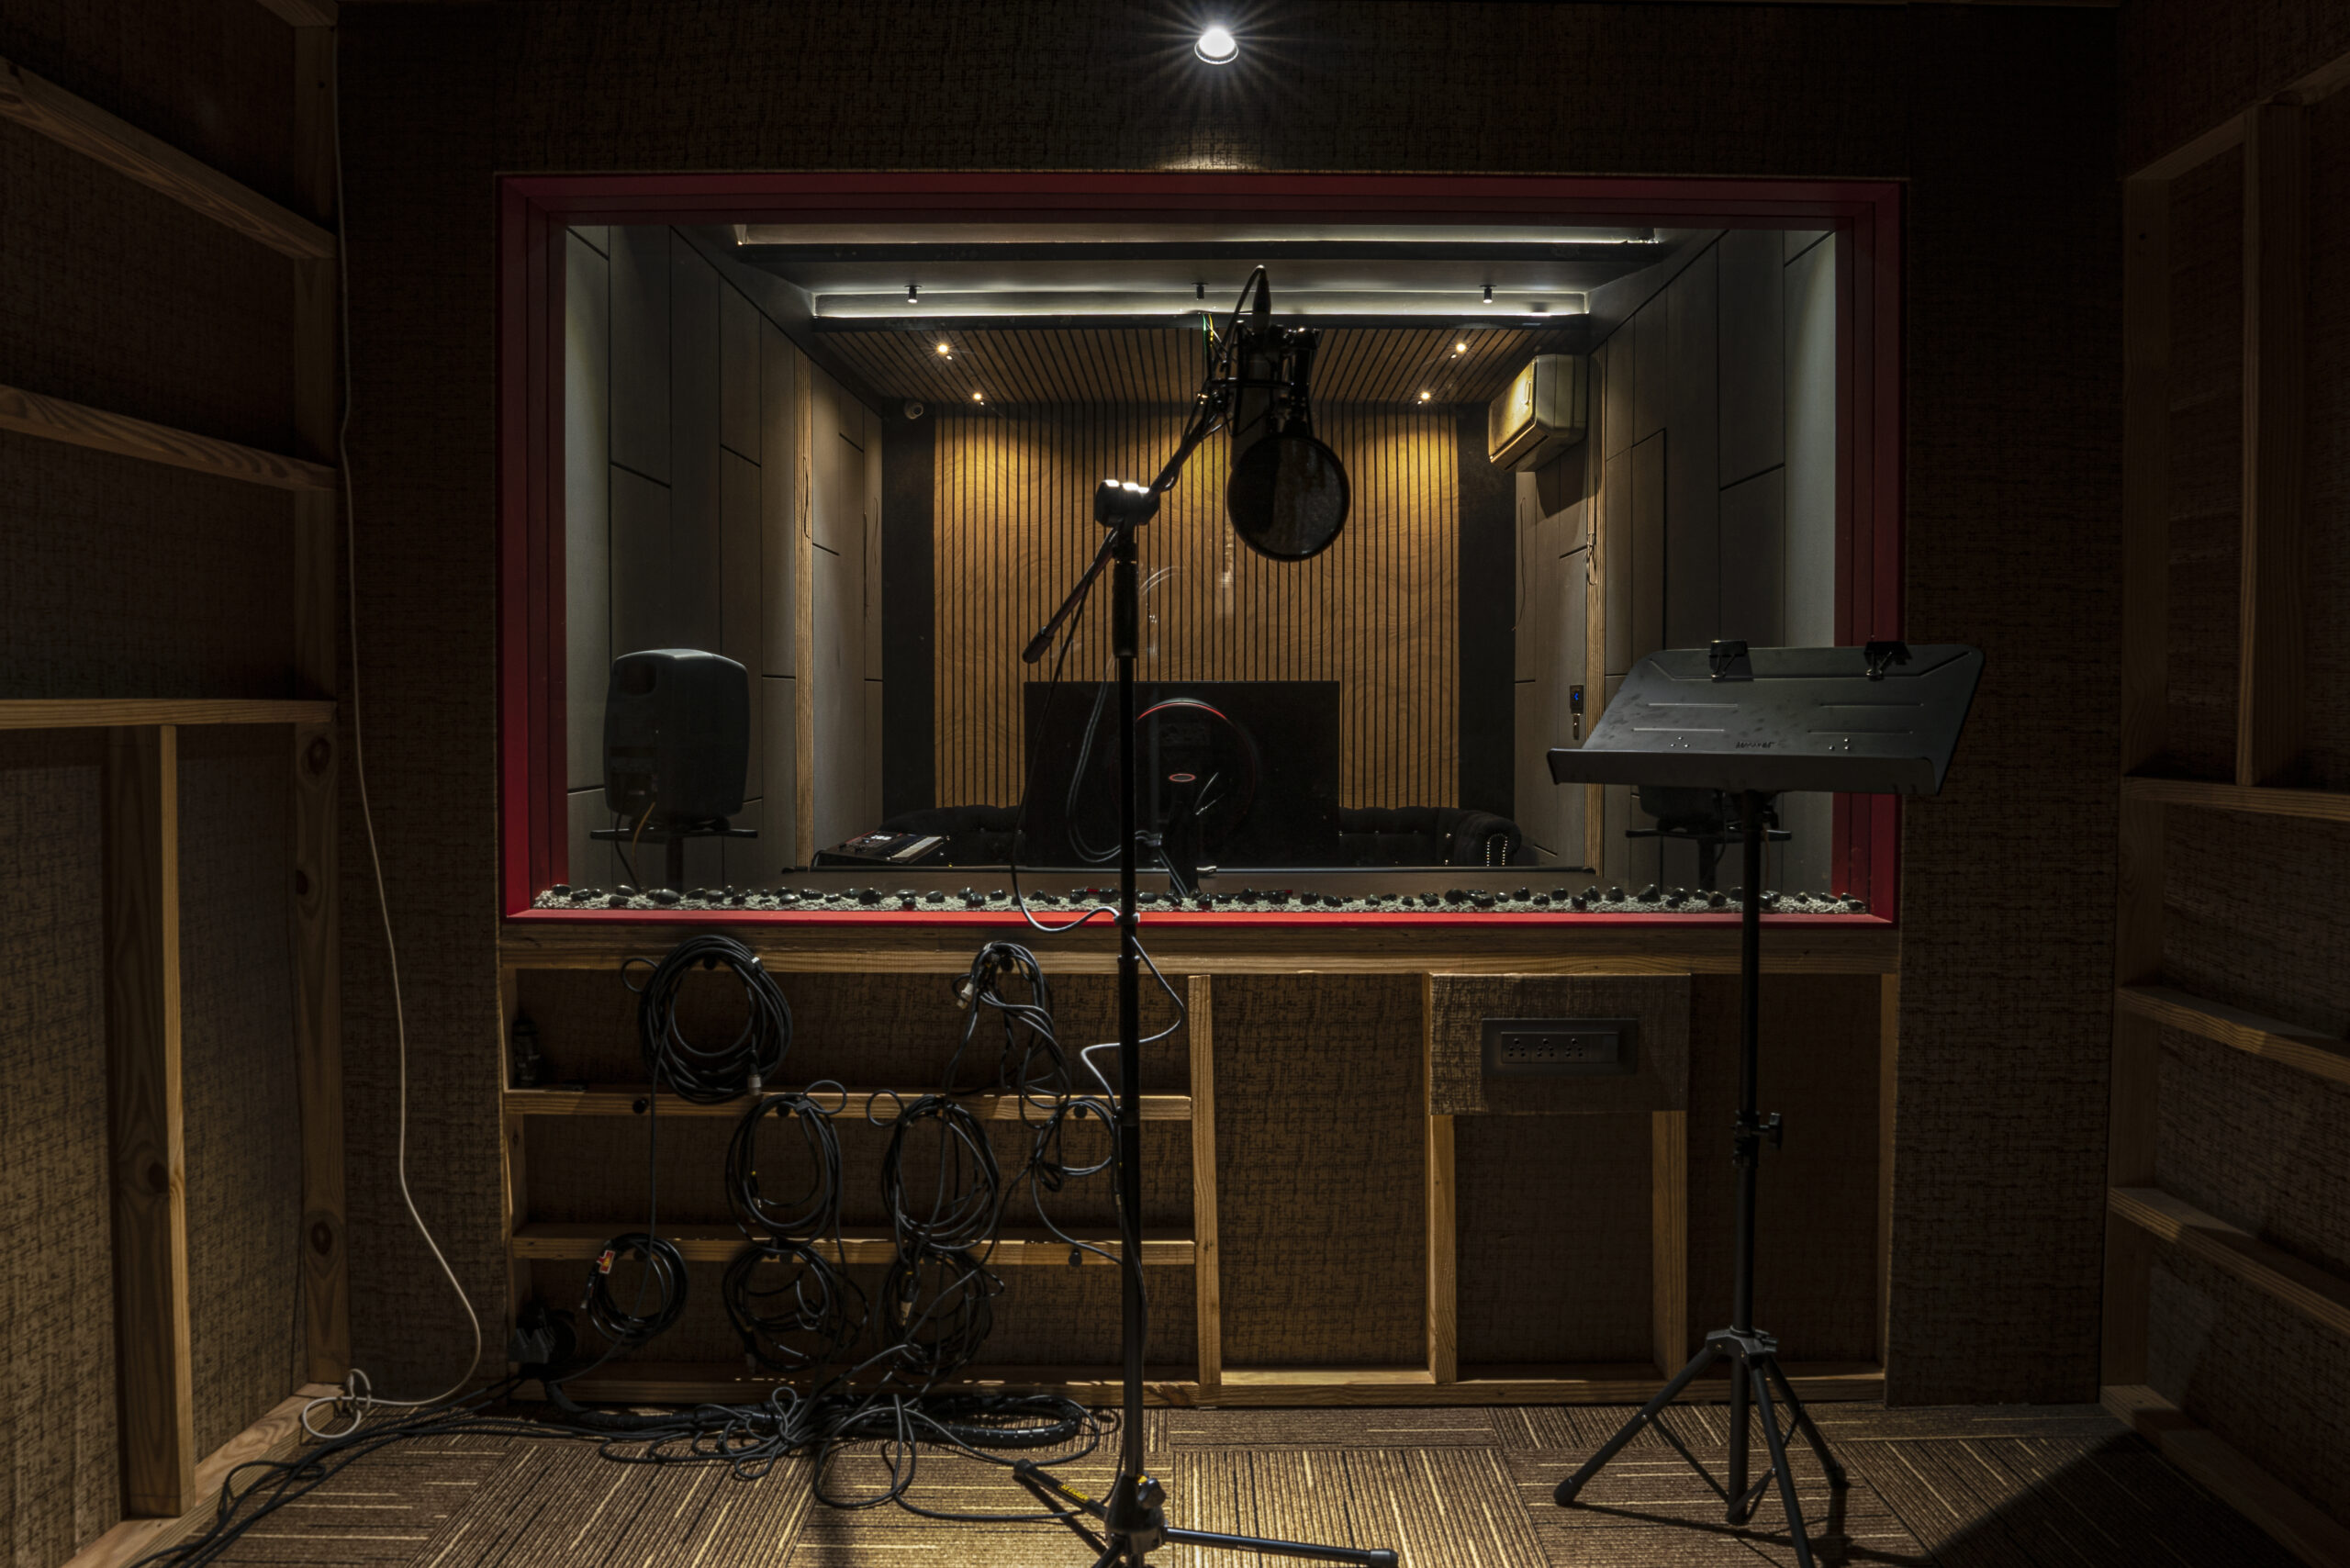 The benefits of using a professional recording studio